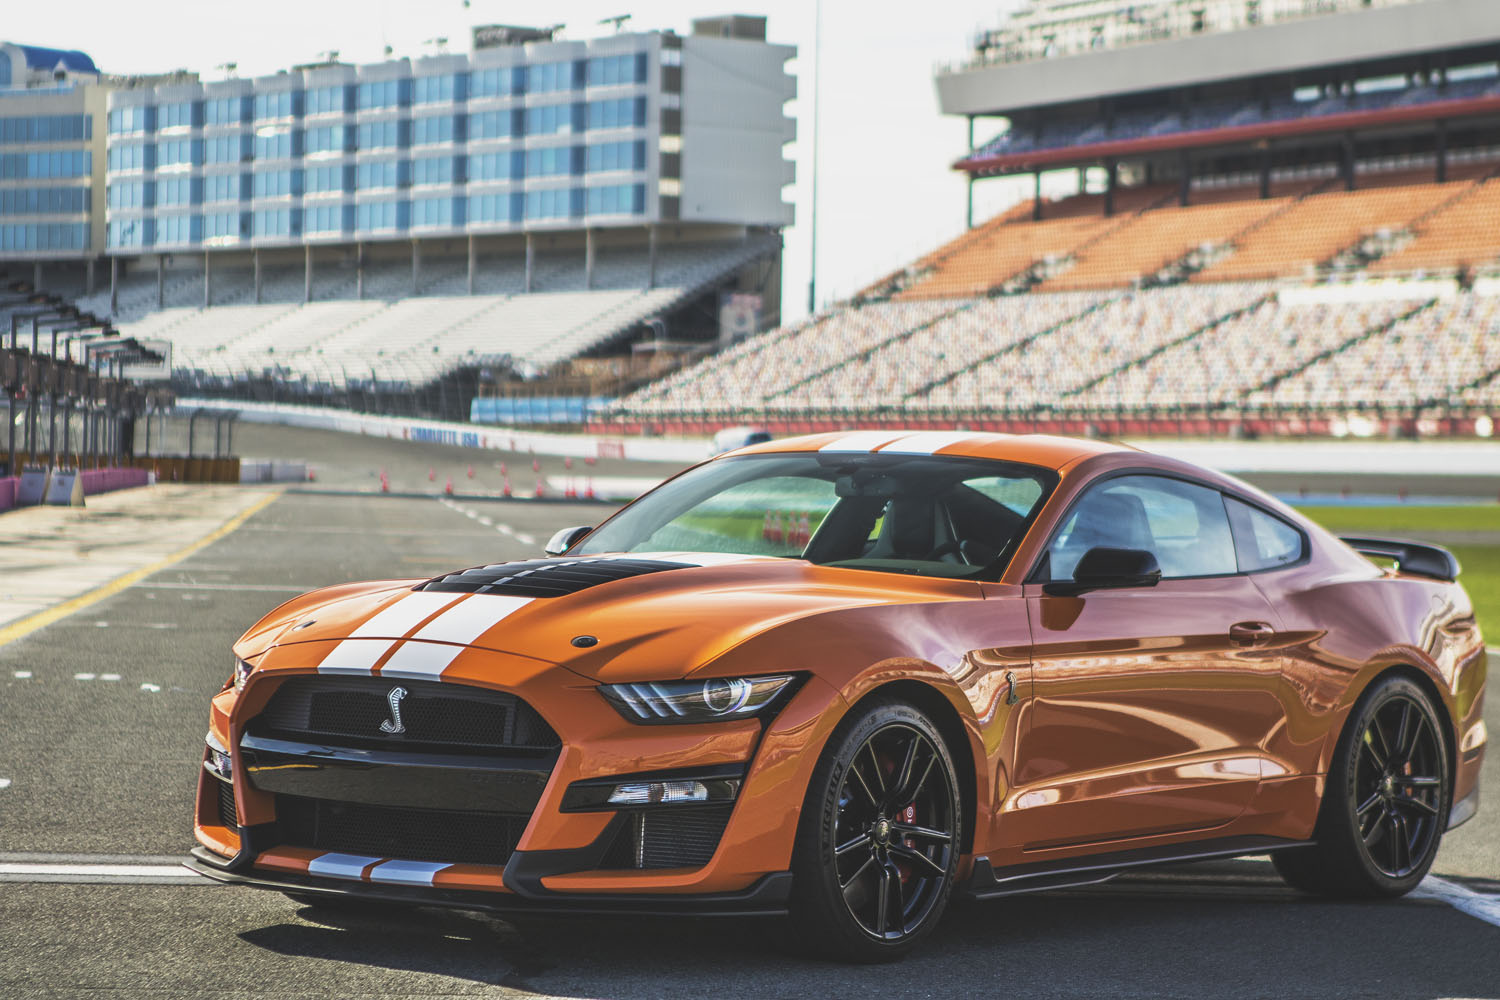 2020 Ford Mustang Shelby GT500 Compared To 2019 Chevrolet Camaro ZL1 1LE